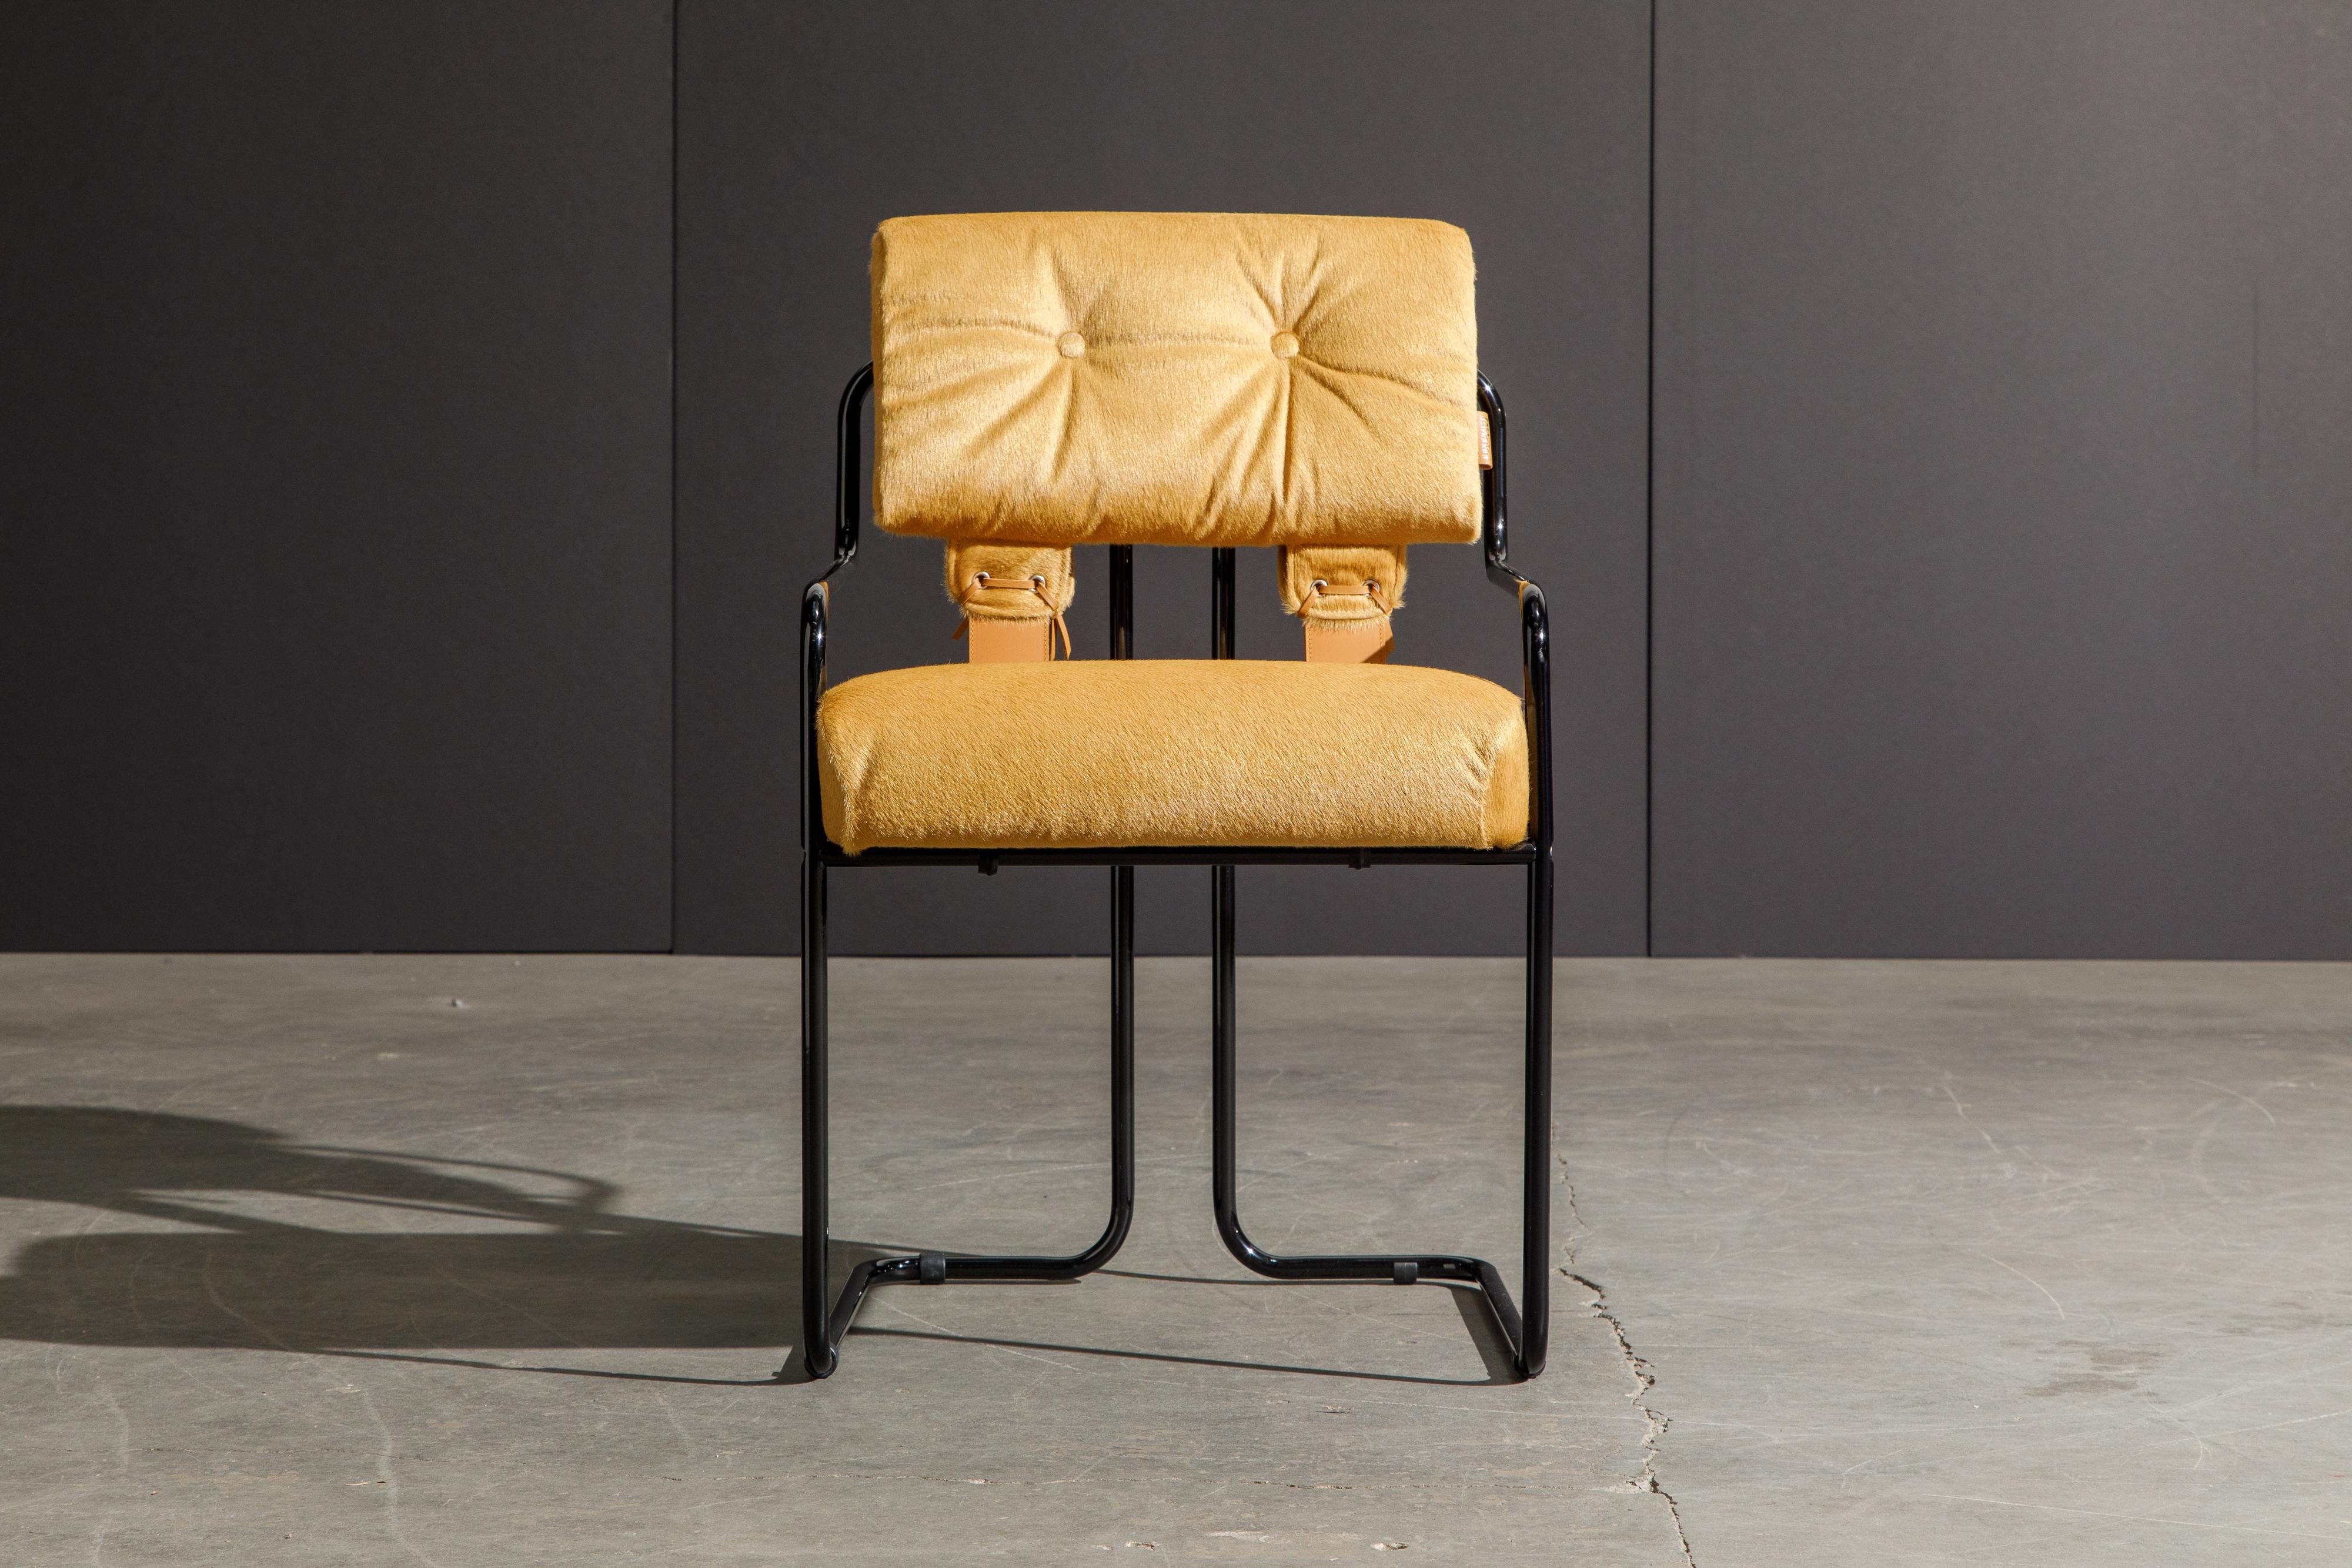 Currently, the most coveted dining chairs by interior designers are 'Tucroma' chairs by Guido Faleschini for i4 Mariani, and we have this incredible Tucroma armchair in beautiful (brand new) golden caramel colored cowhide leather (aka hair-on-hides)